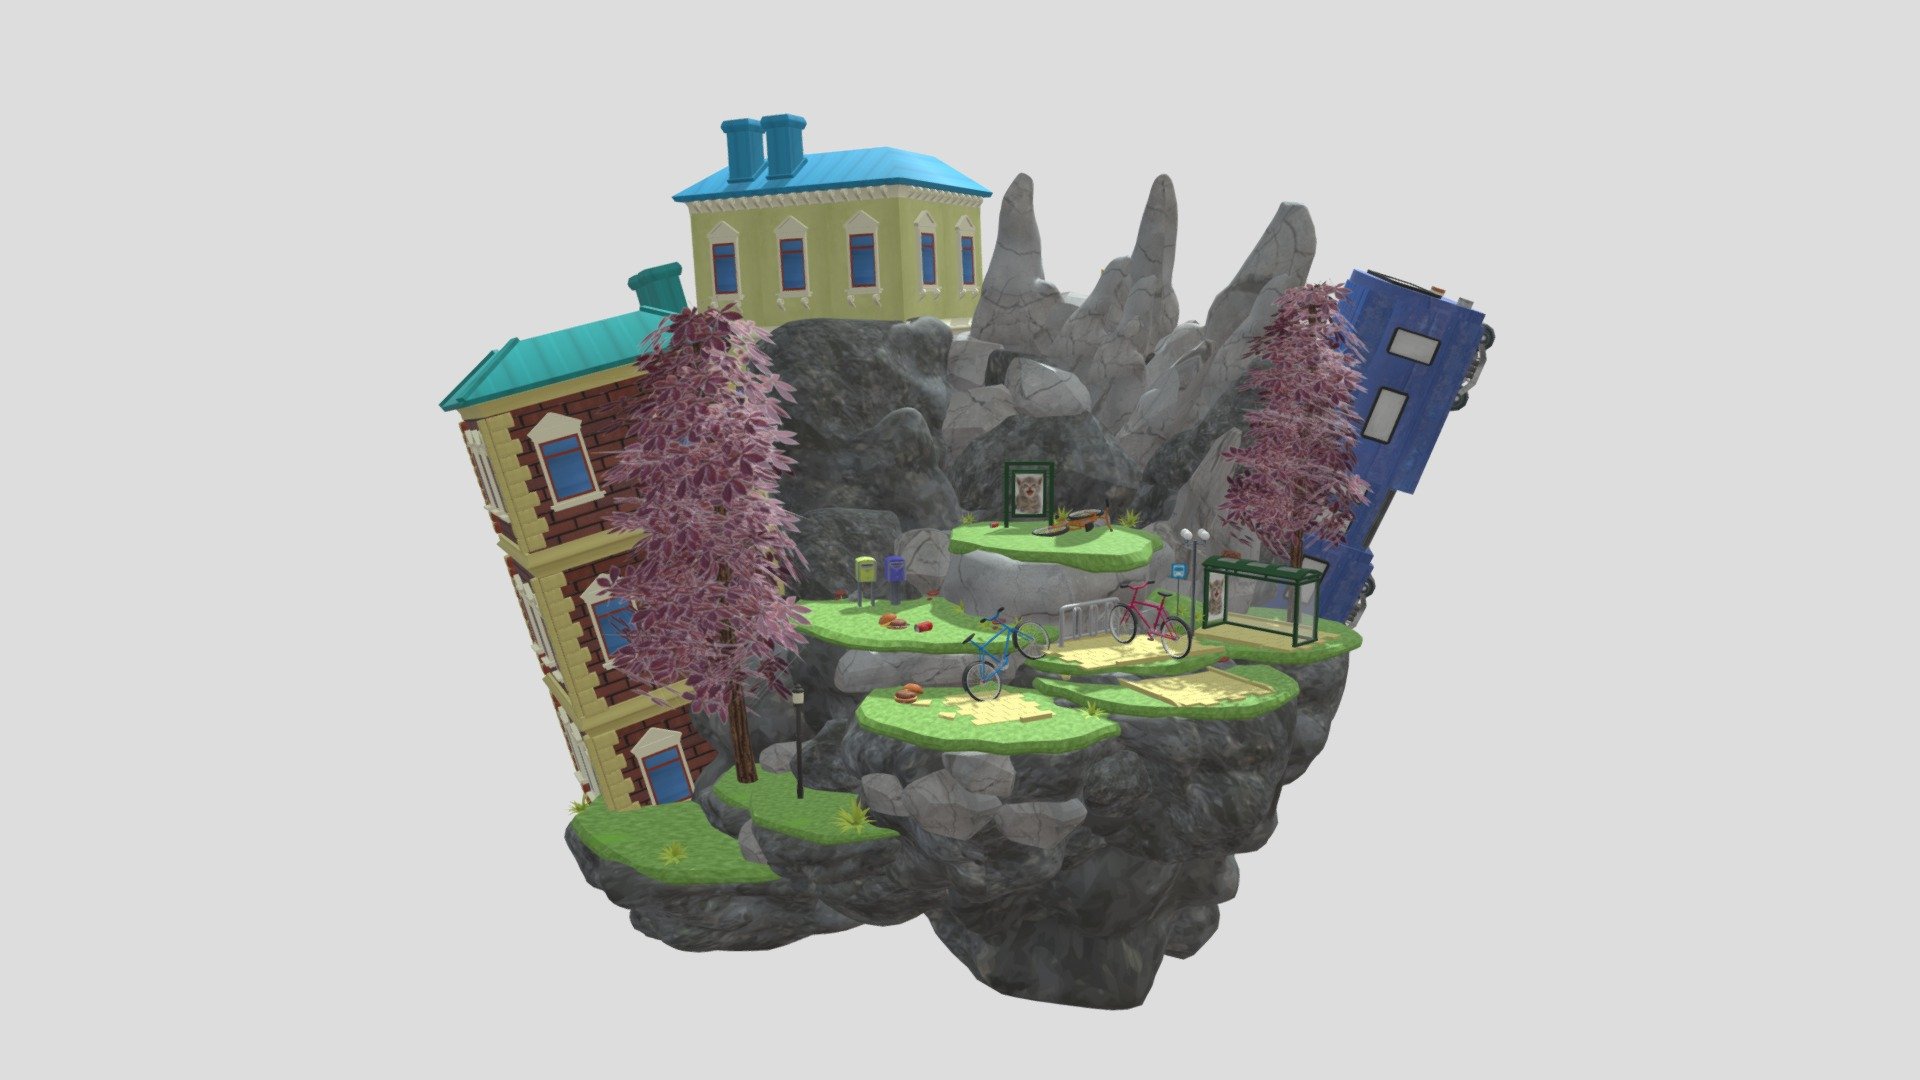 Made in Maya, Textured in Photoshop - ISLAND DIORAMA - 3D model by xanthus1608 3d model